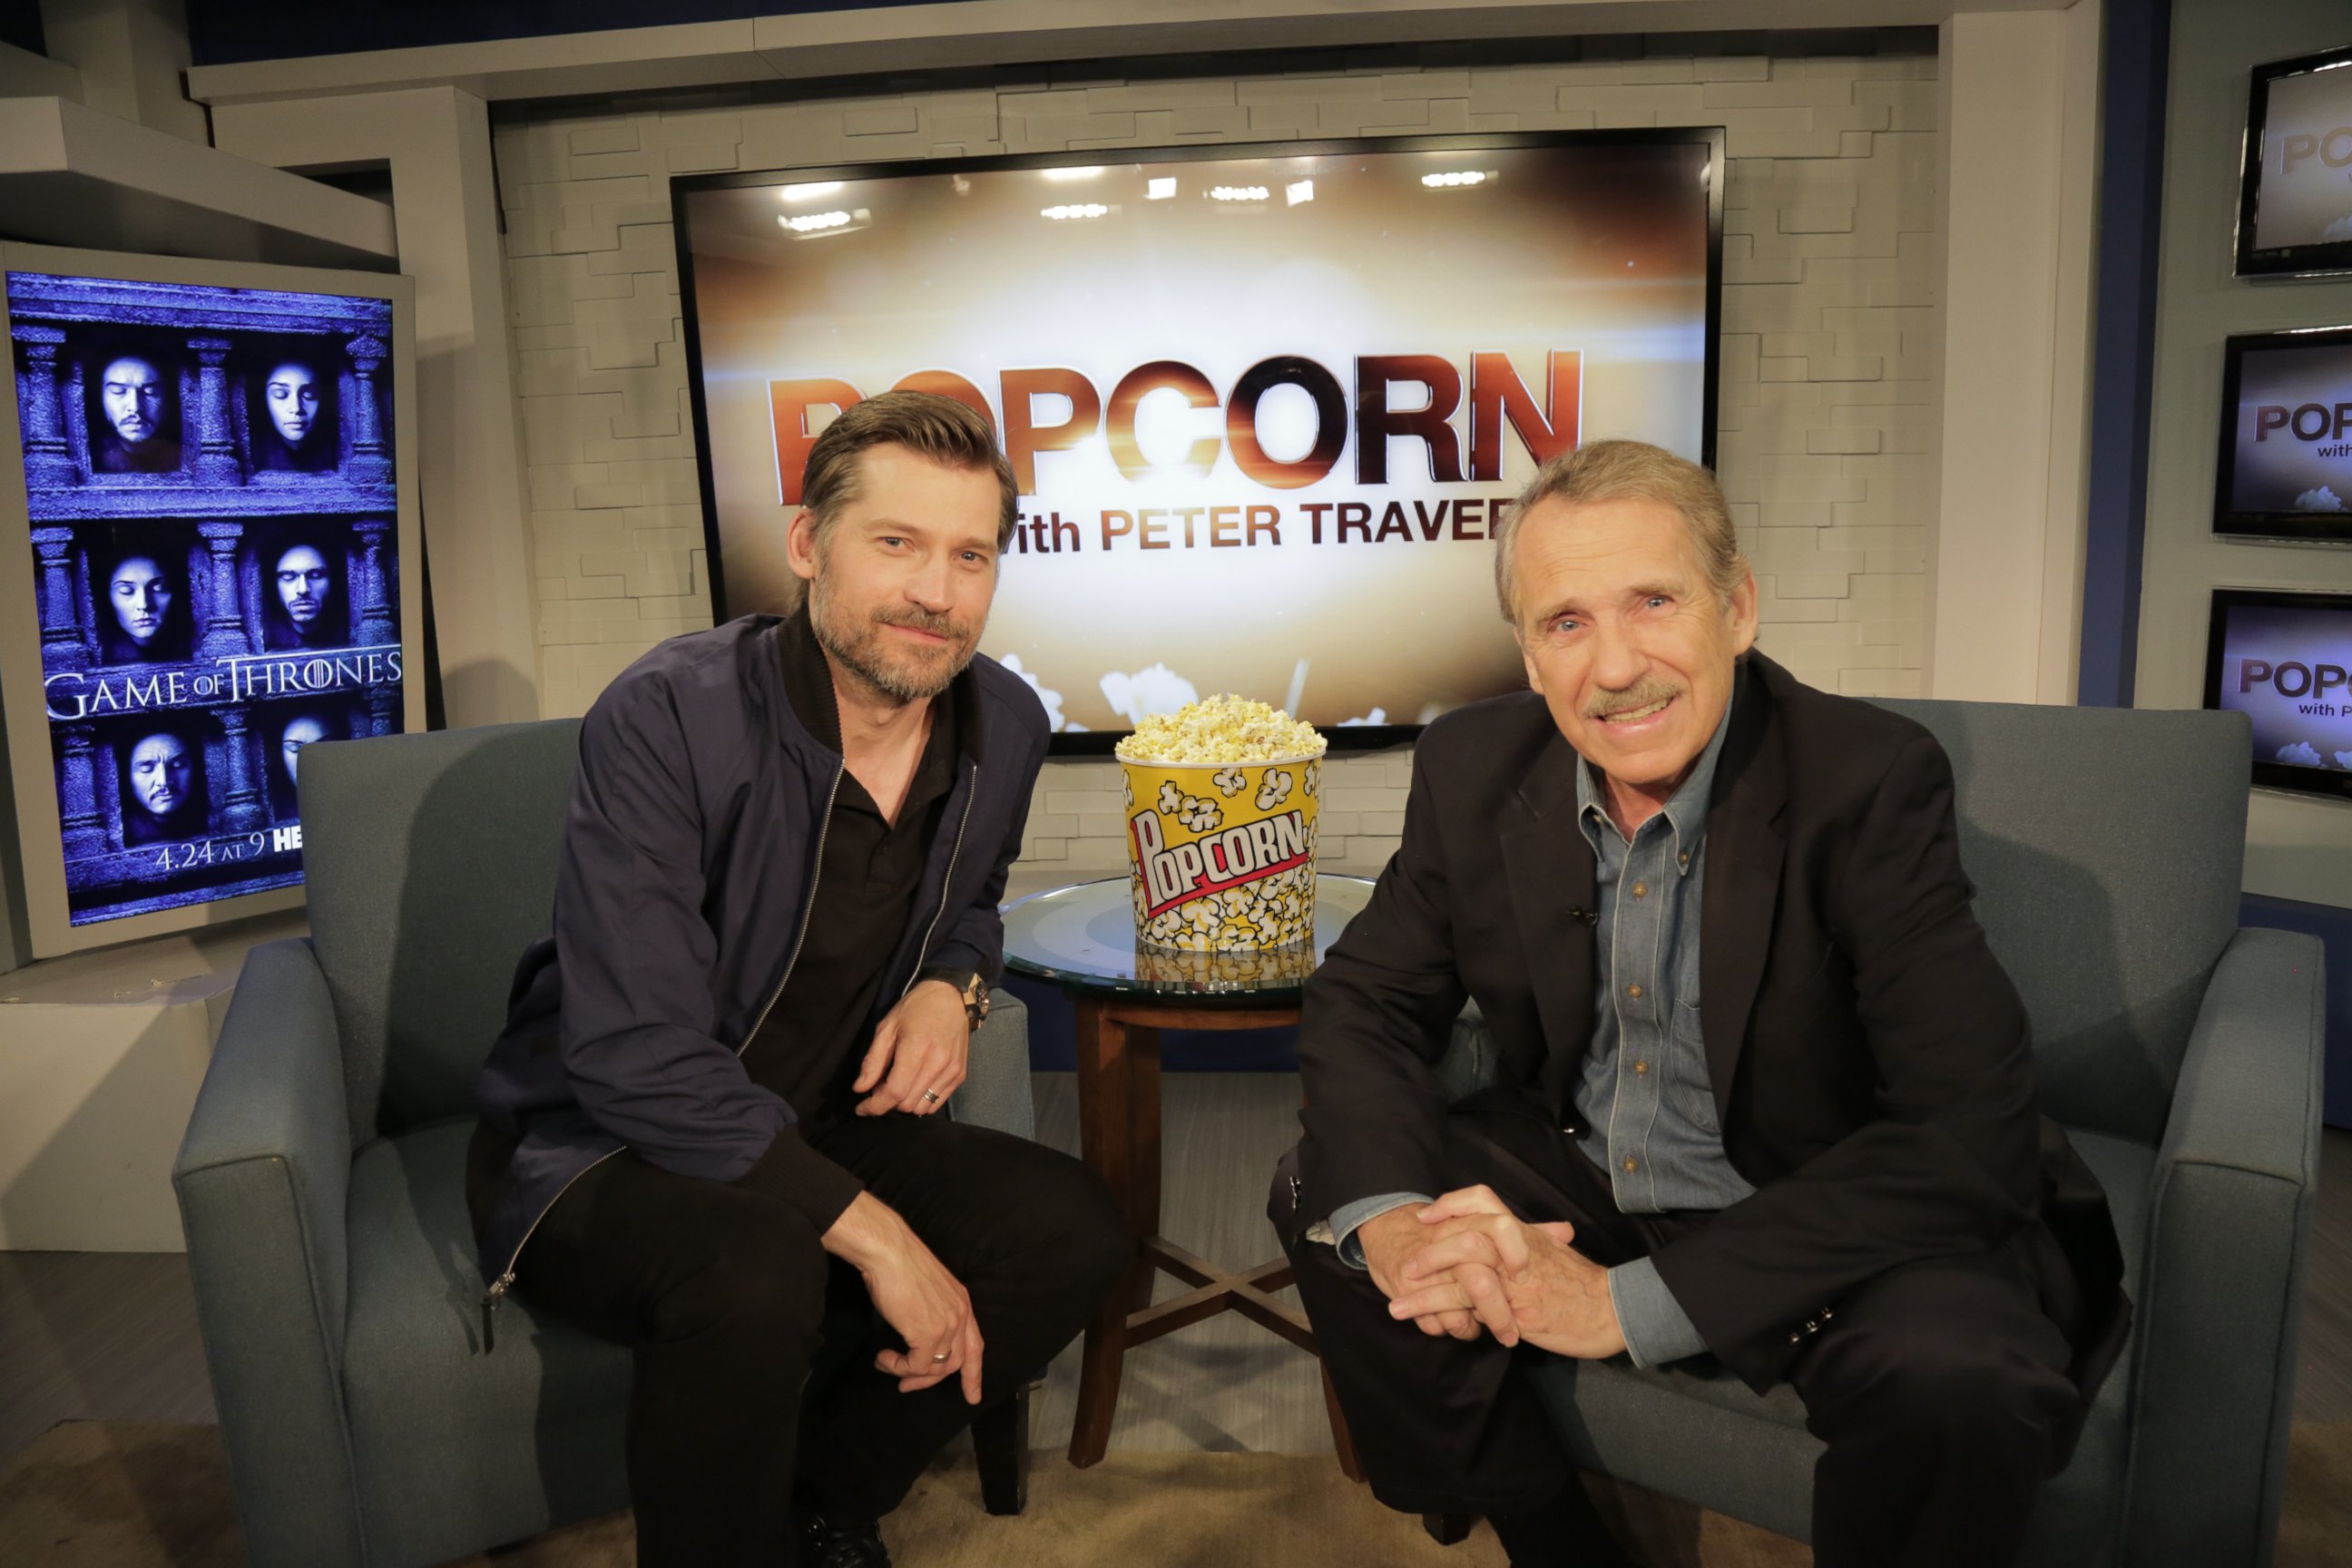 PHOTO: 'Game of Thrones' star Nikolaj Coster-Waldau discussed his role as Jaime Lannister with Peter Travers on ABC News' "Popcorn With Peter Travers."